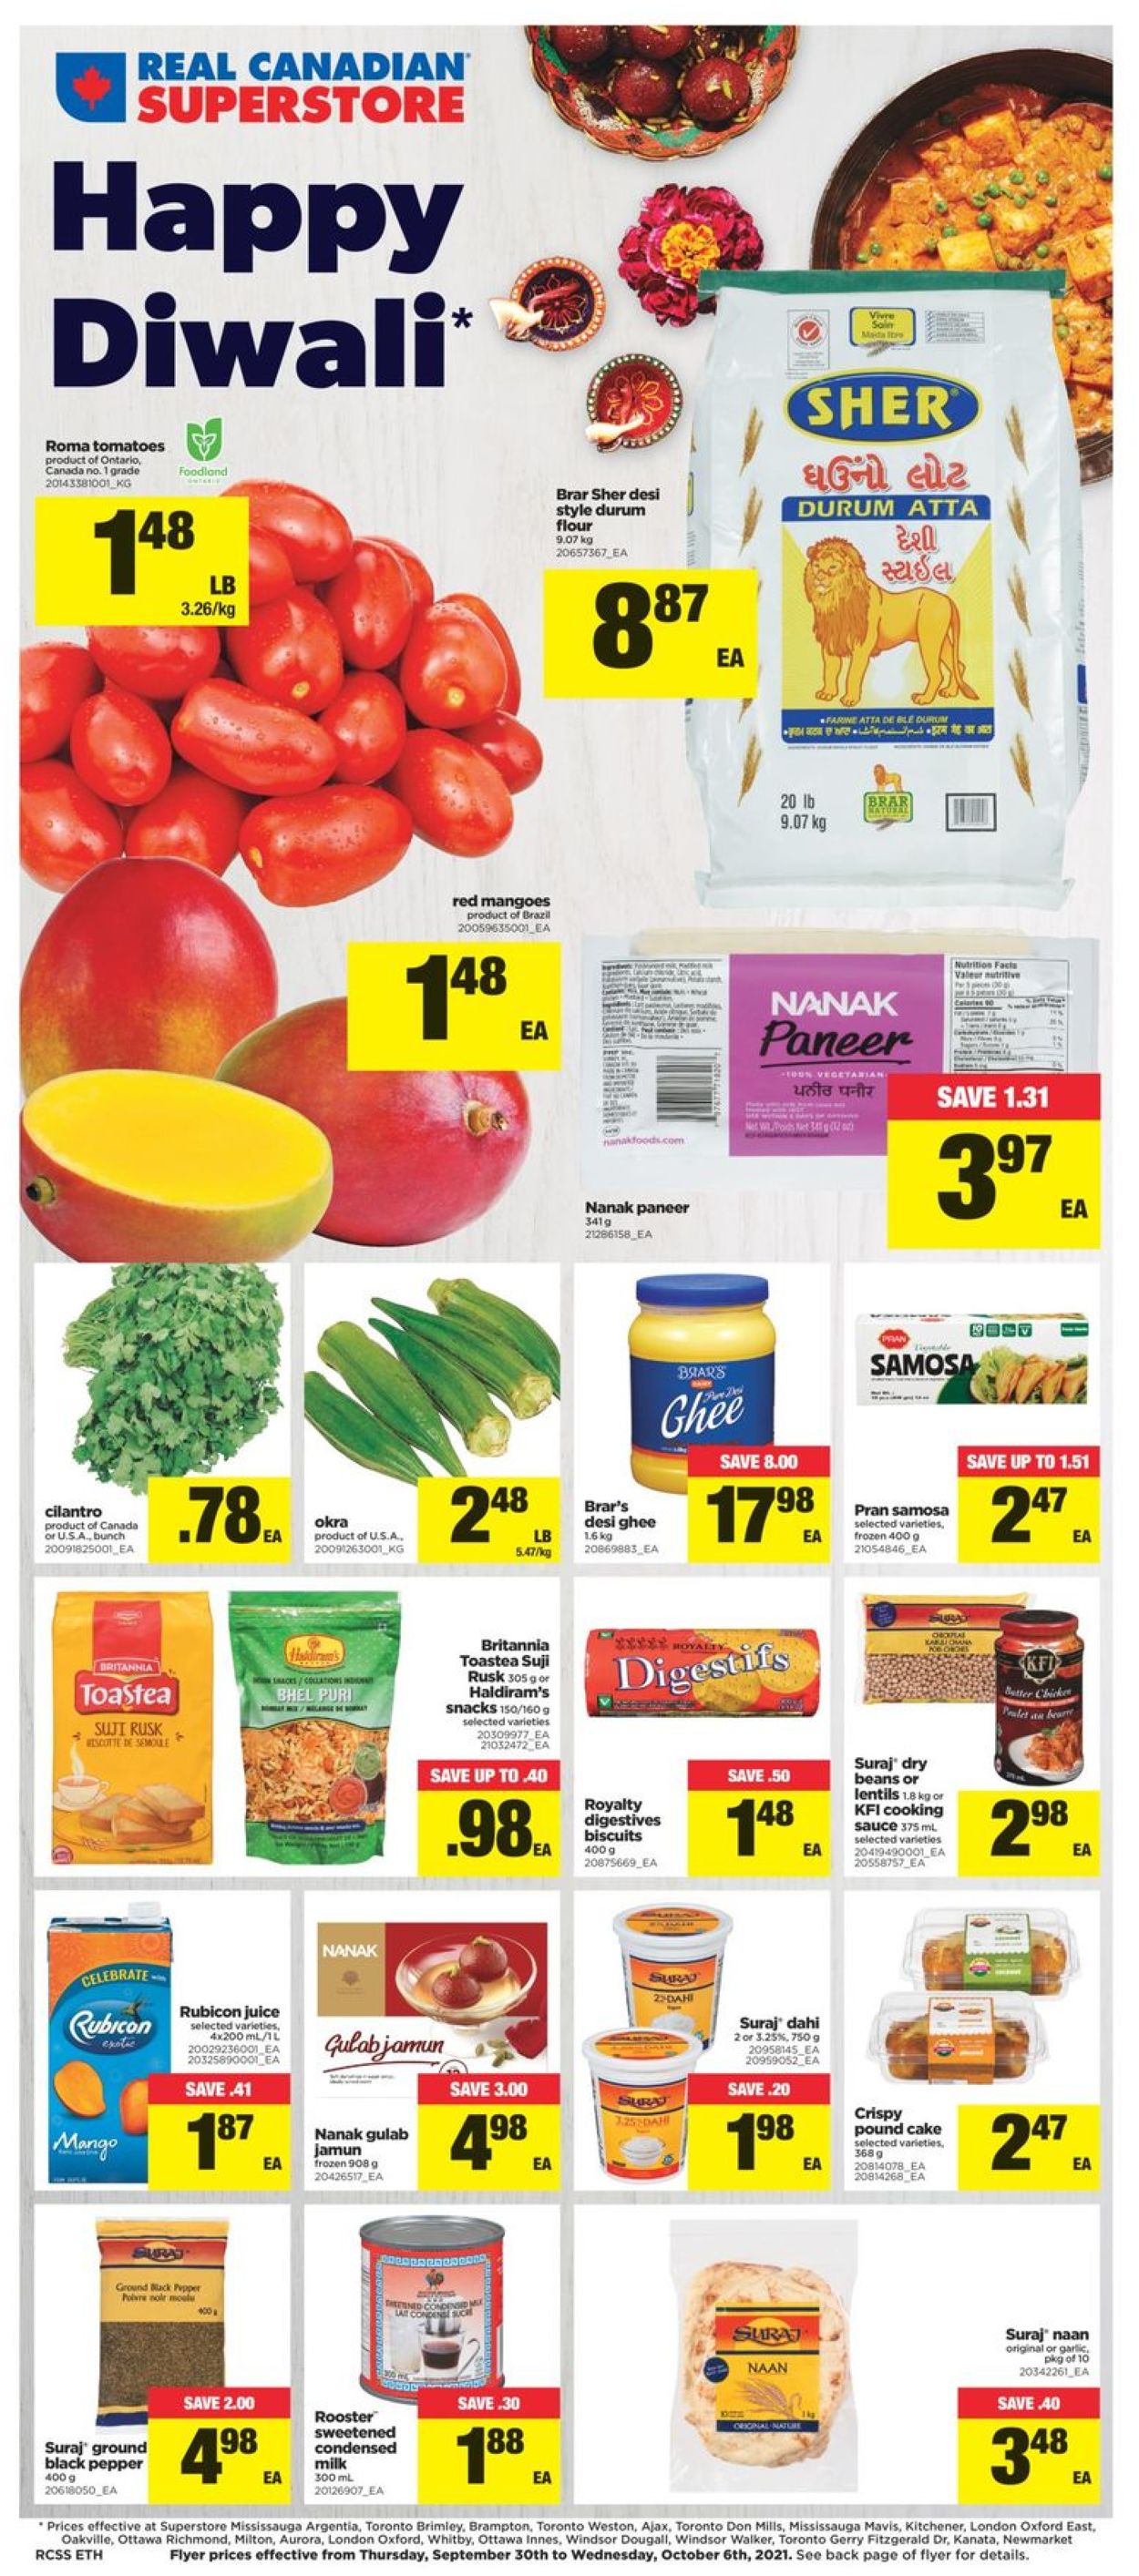 Real Canadian Superstore Flyer - 09/30-10/06/2021